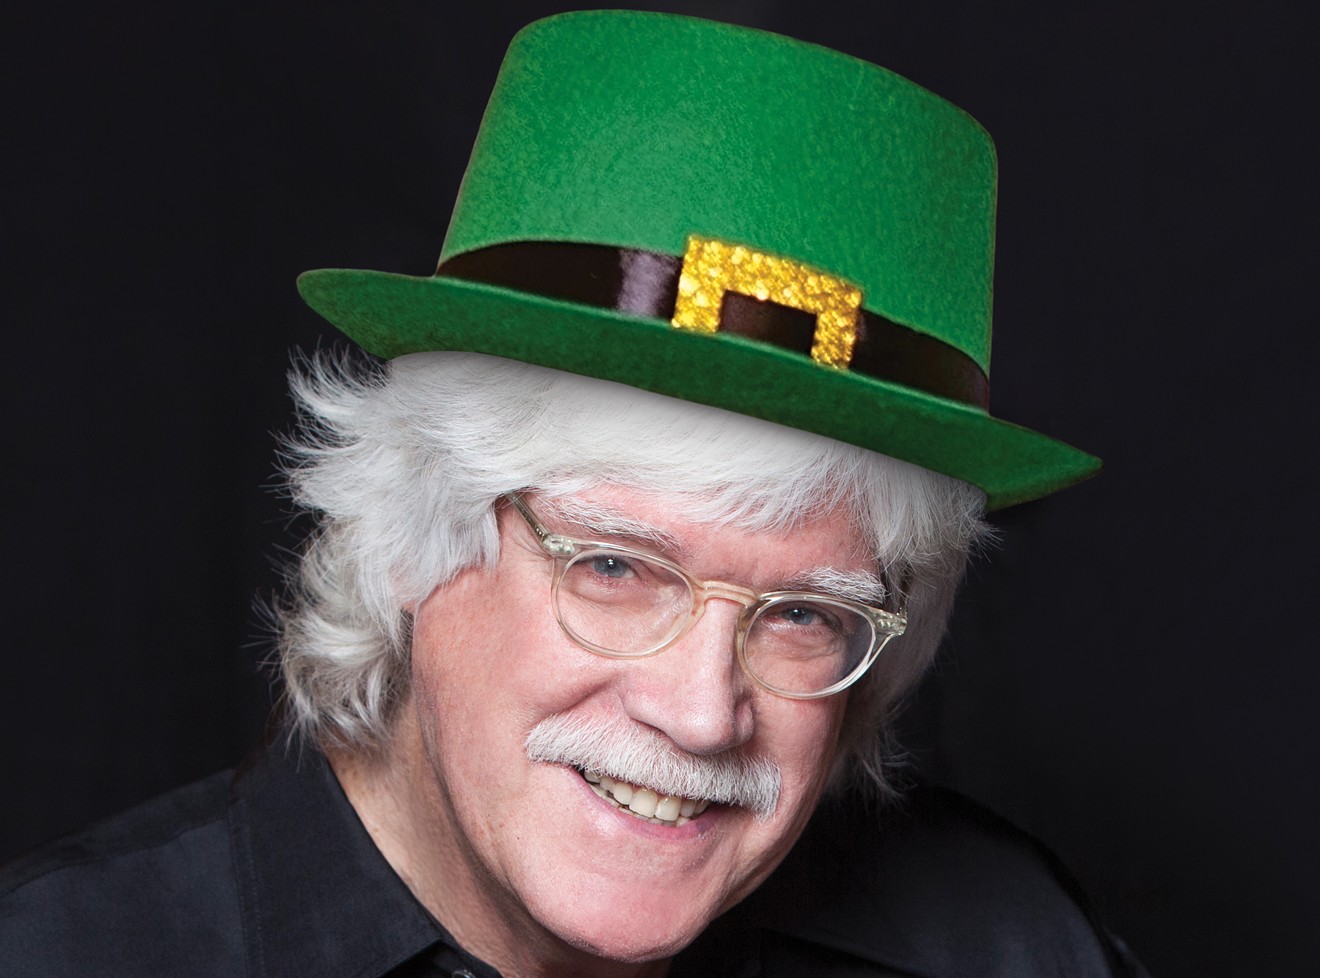 Feel the luck of the Irish at Dr. Kevin Fitzgerald's March 17 Comedy Works headliner.